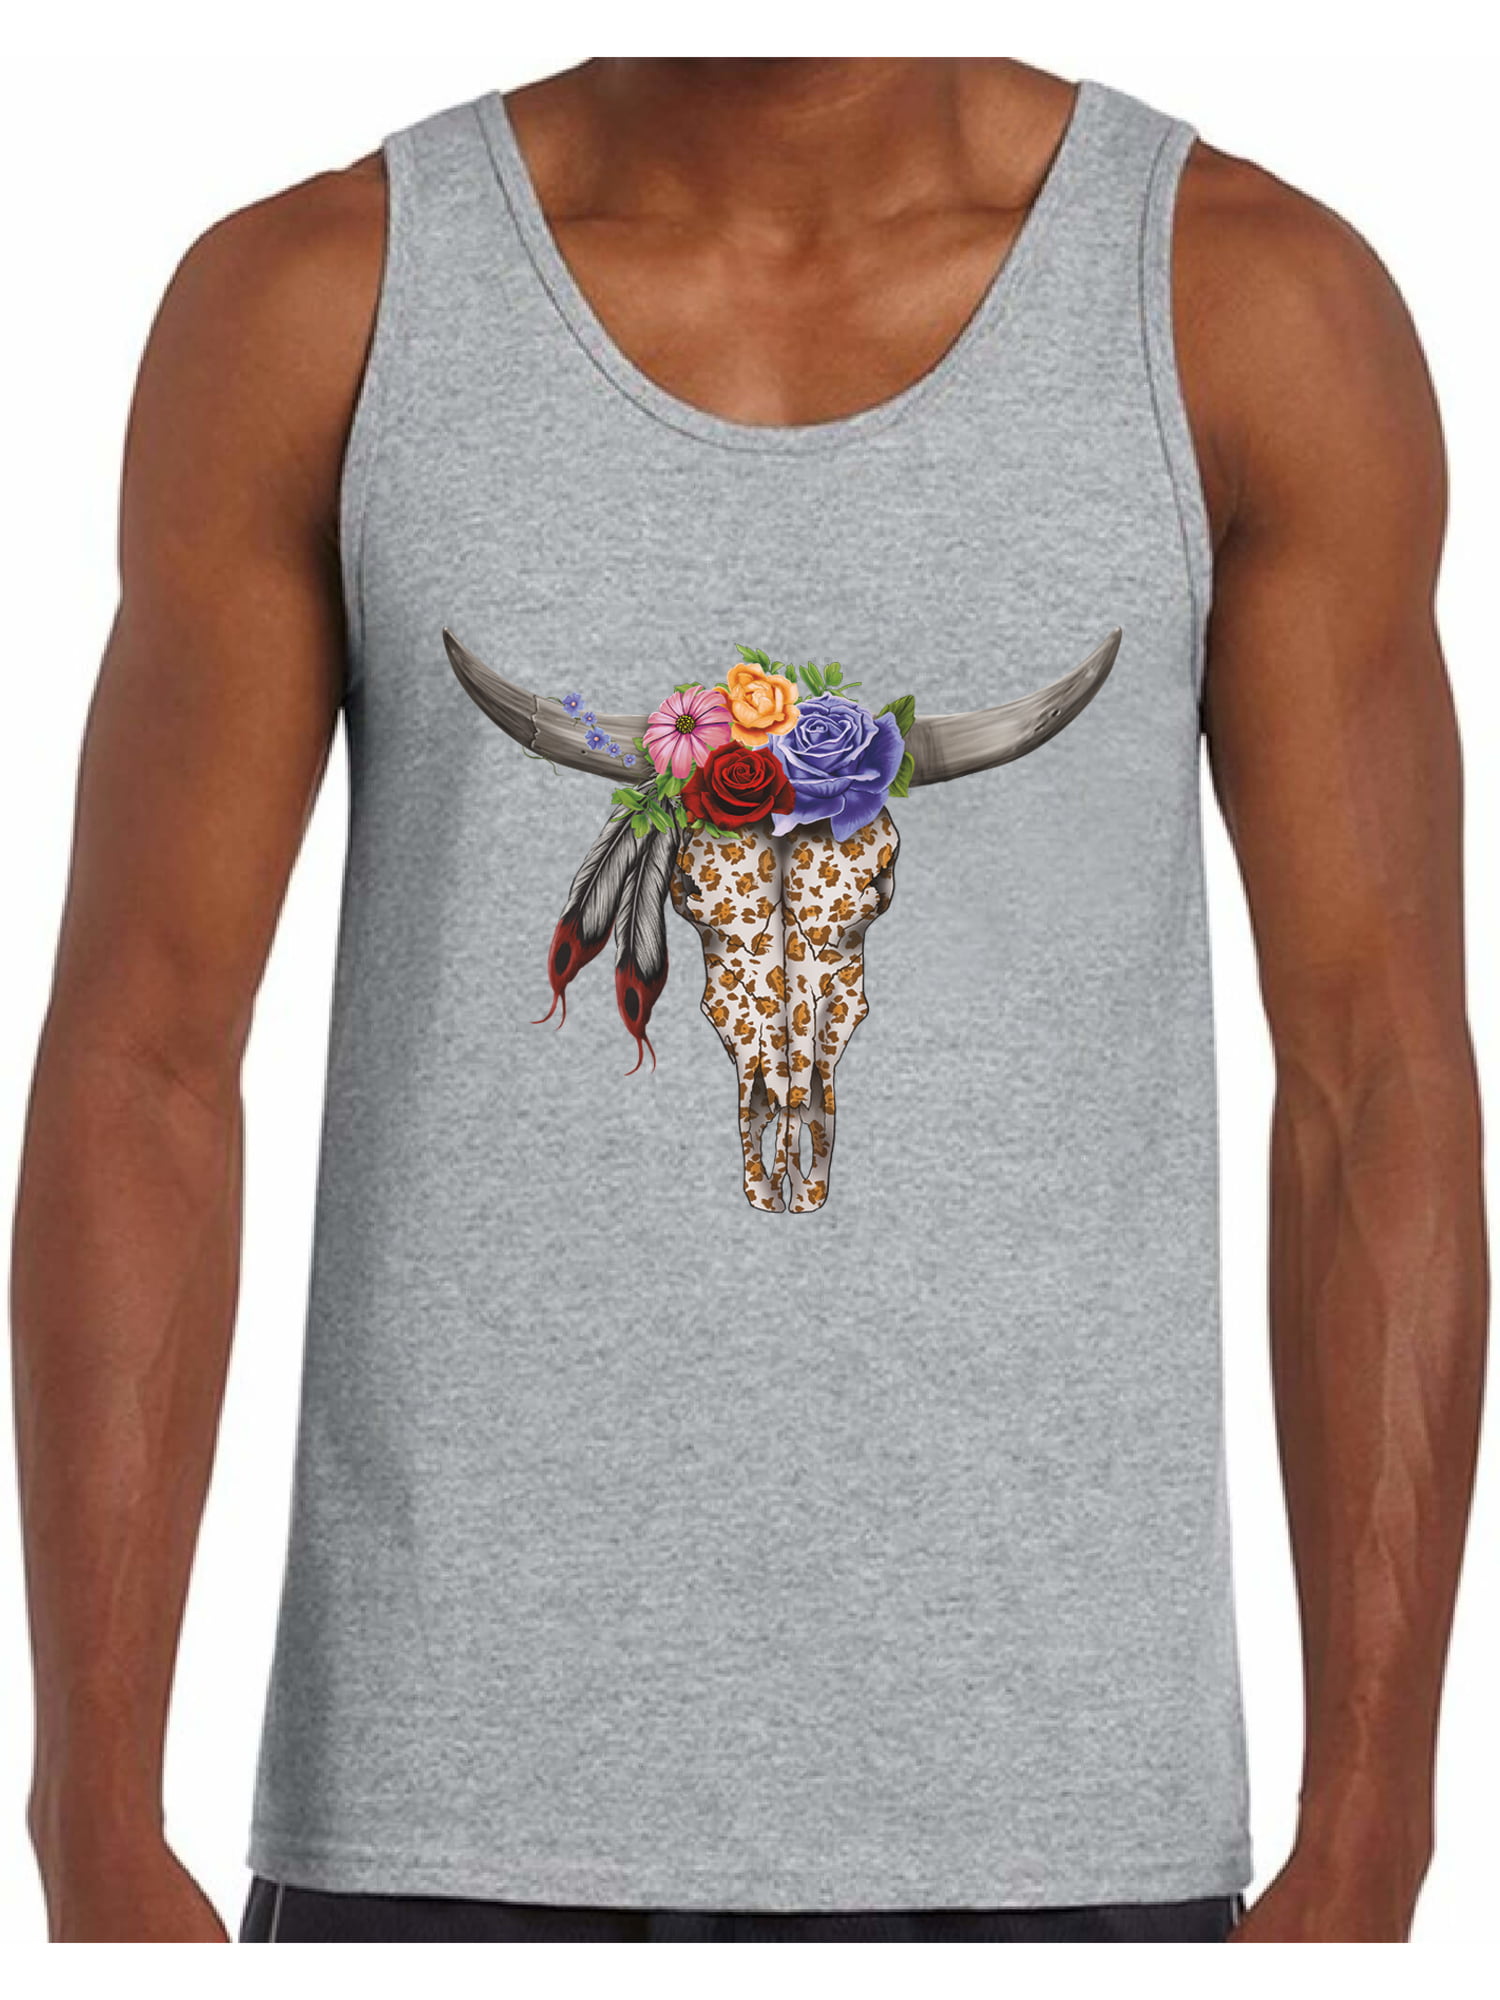 Cow Skull Tank Top Men's Skull Tank Day of the Dead Gifts for Him. Floral Bull Skull Muscle Shirt